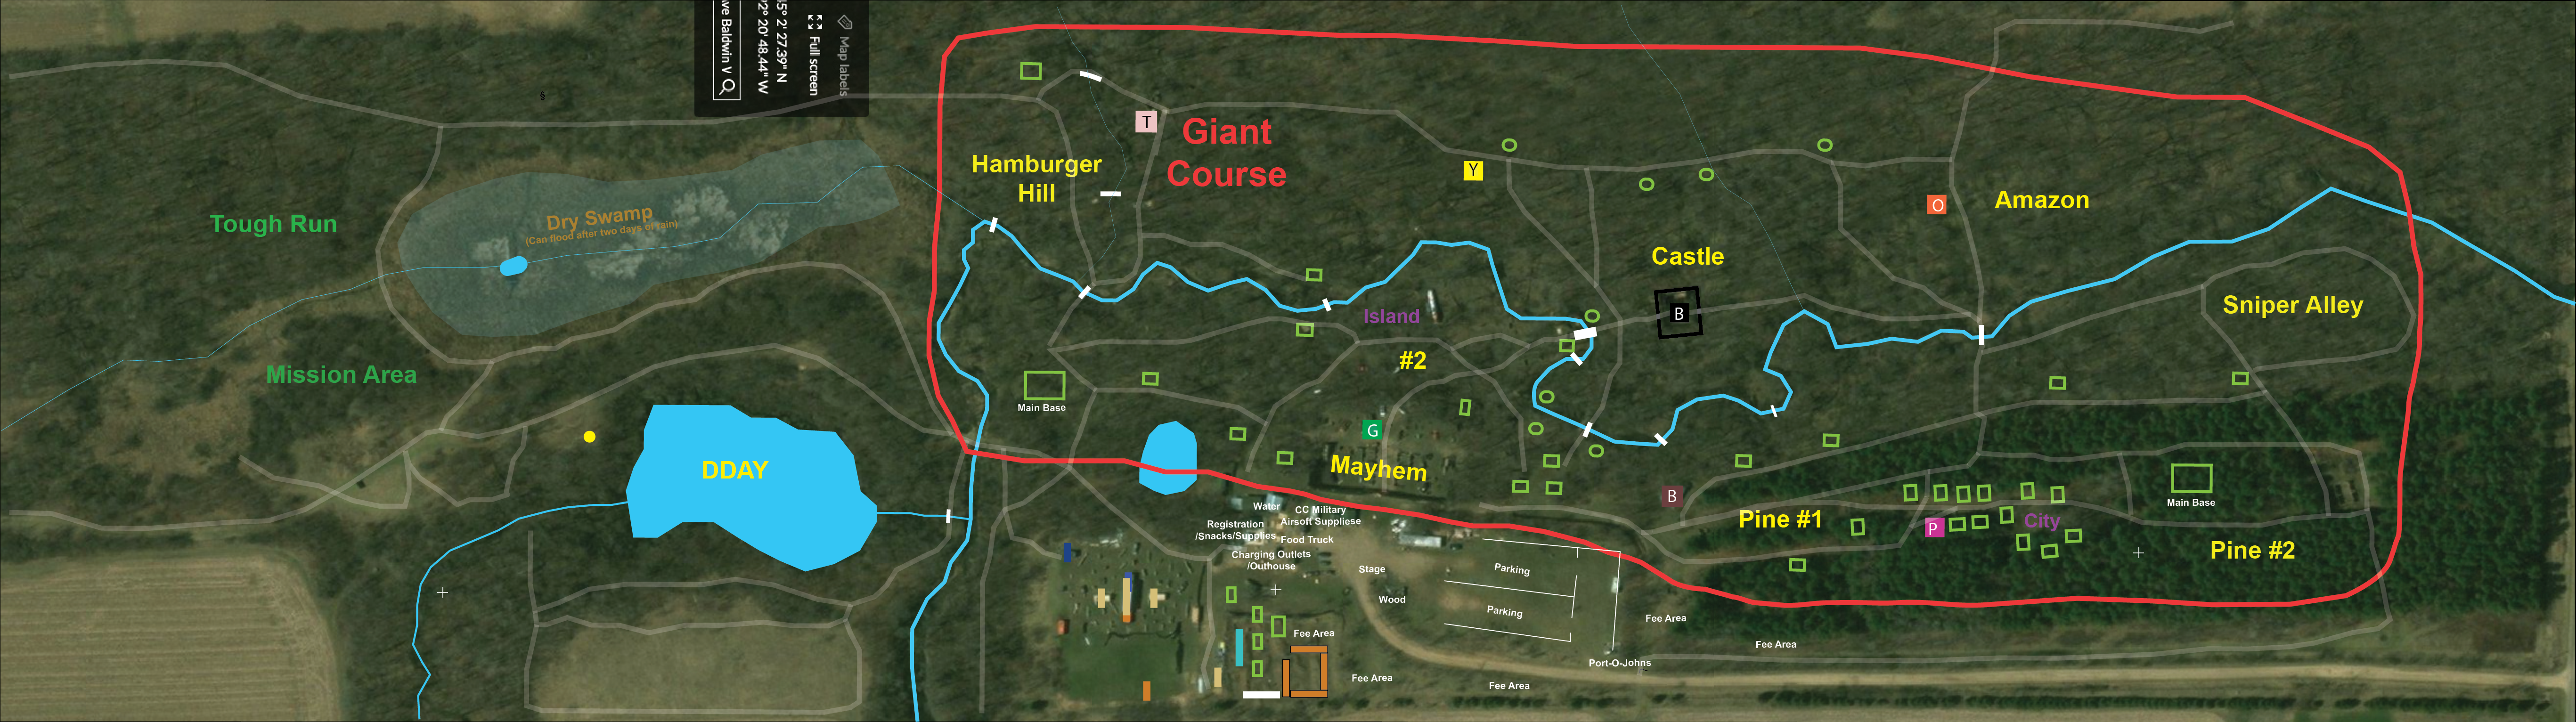 Giant Airsoft Game map